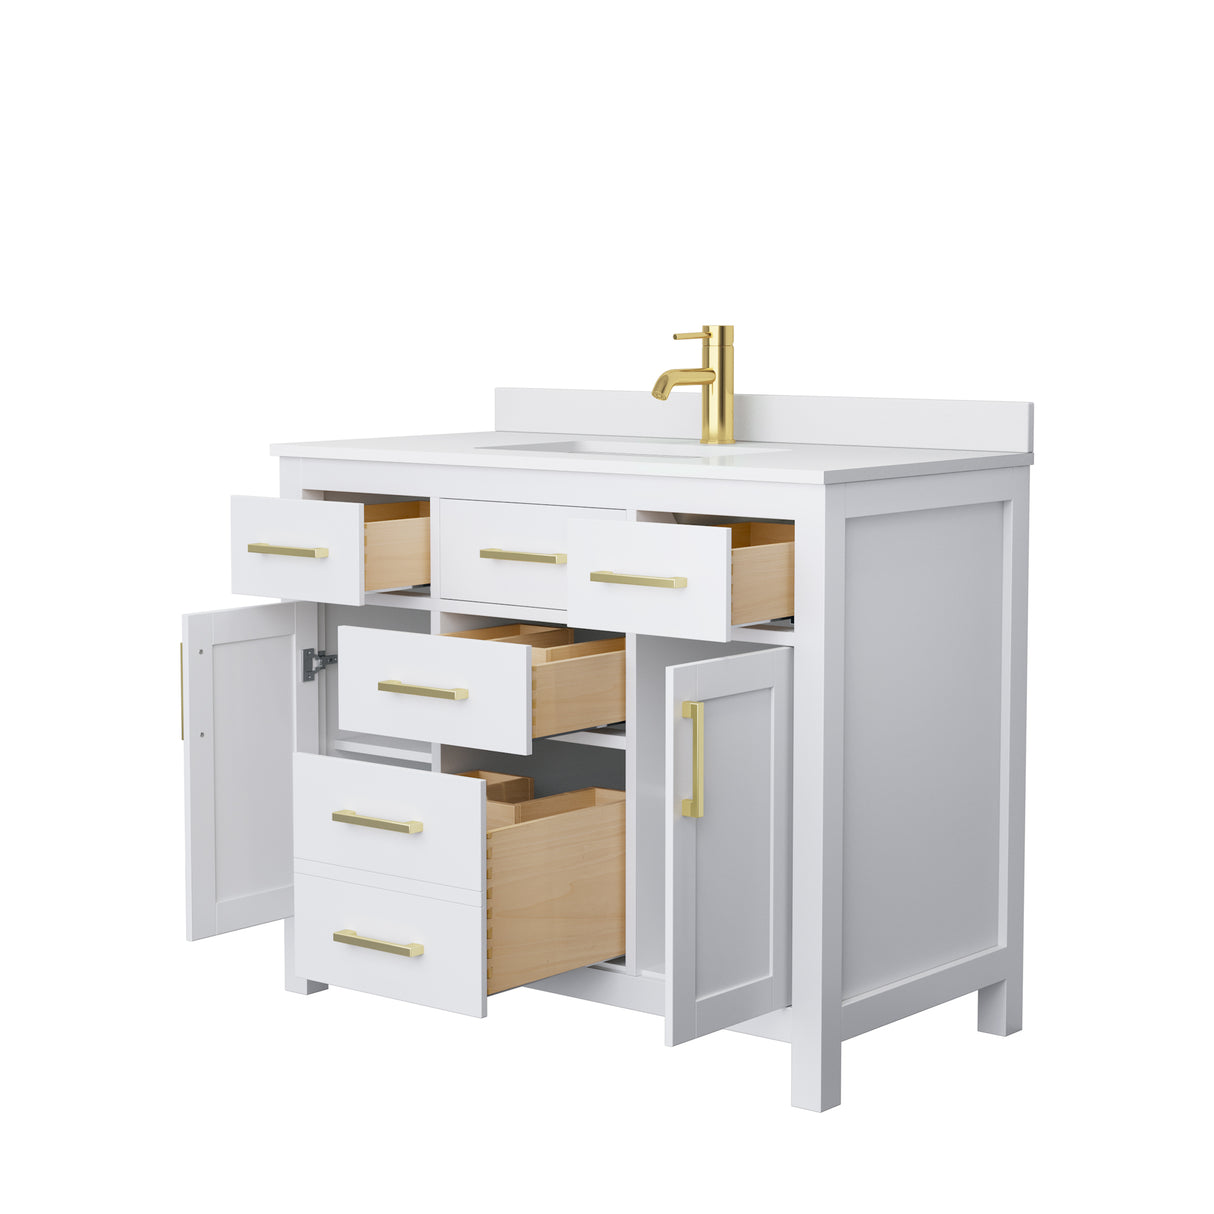 Beckett 42 Inch Single Bathroom Vanity in White White Cultured Marble Countertop Undermount Square Sink Brushed Gold Trim